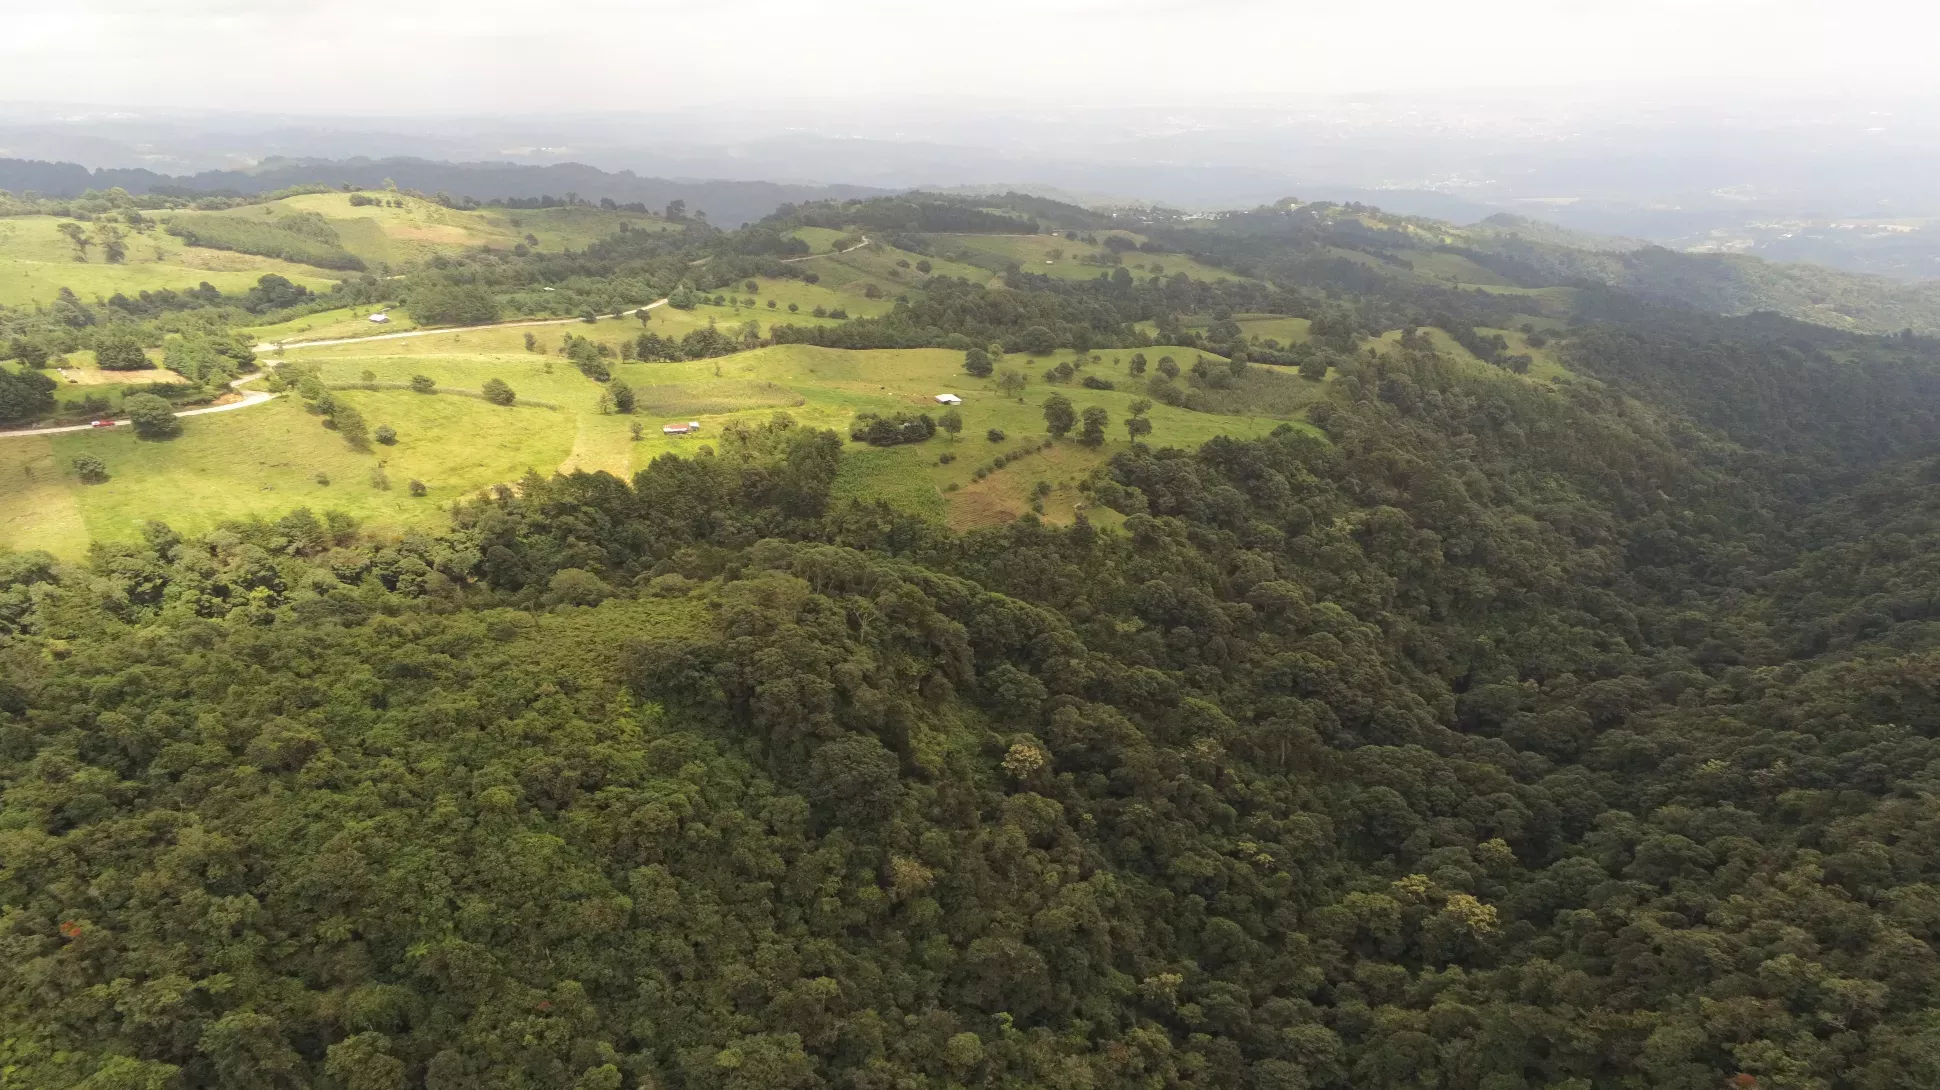 A wide shot of green hills with both forests and fields